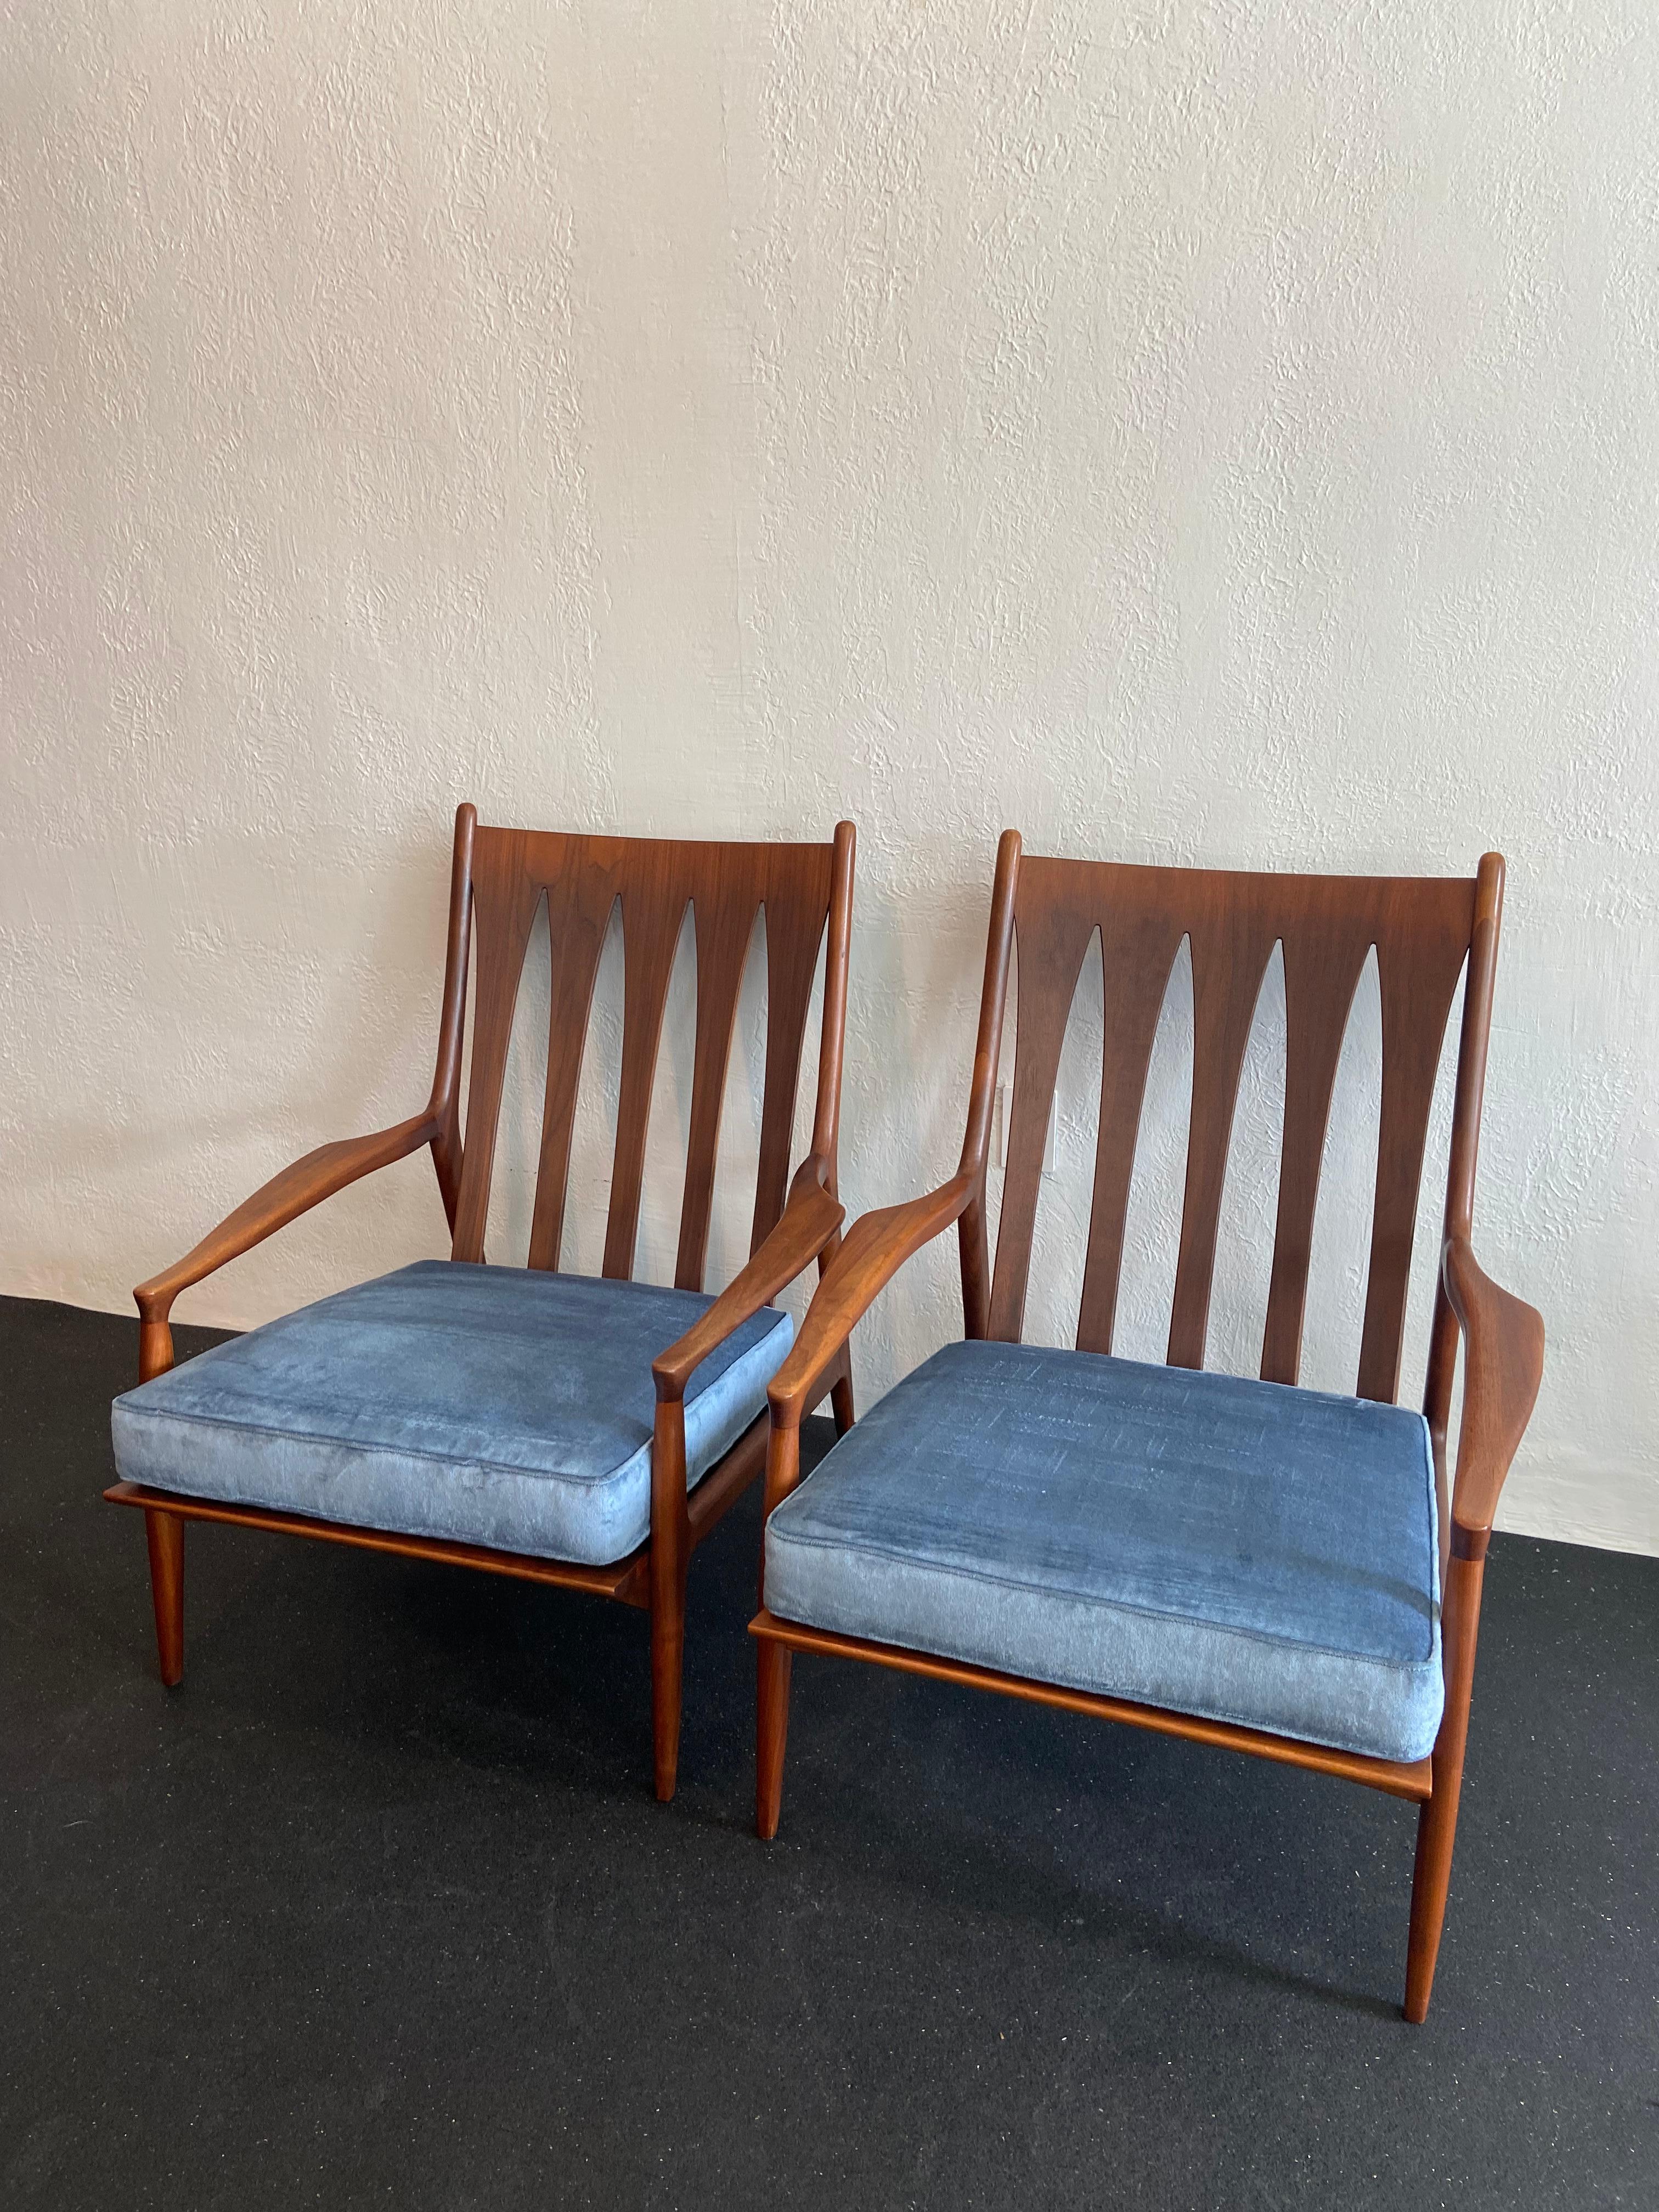 Pair of sculpted walnut high back Archie lounge chairs by Milo Baughman for Thayer Coggin. Upholstery is a velvet blend. Minor wear to the as found vintage upholstery and frames. Chairs have not retained the original manufacturer labels and thus are